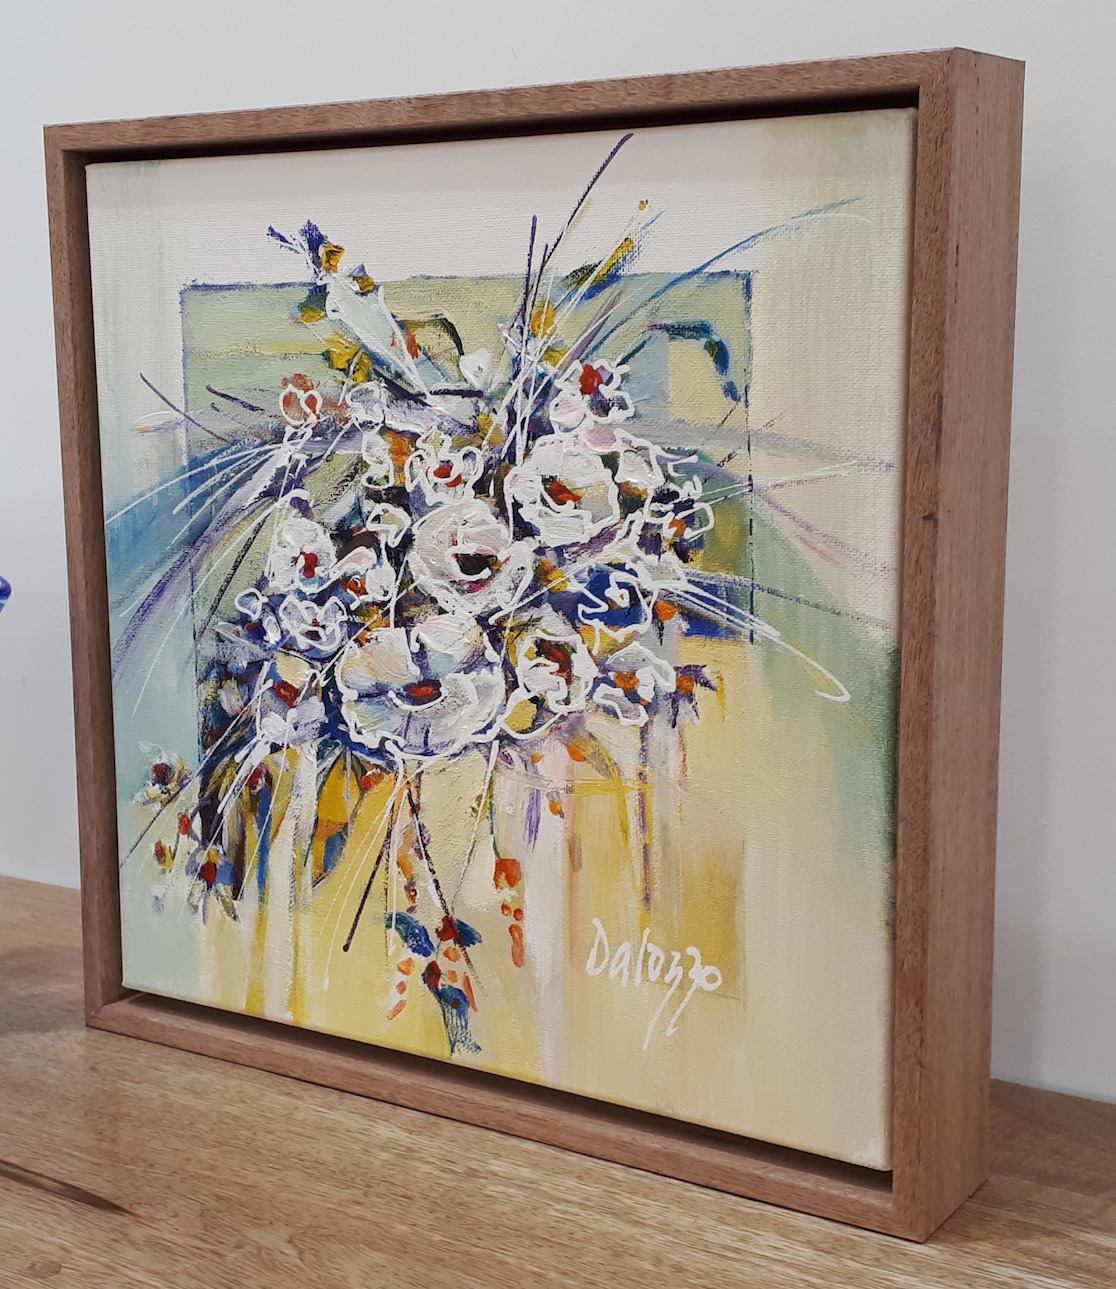 Framed Side View Of Still Life Painting "Floral Study 3" By Lucette Dalozzo